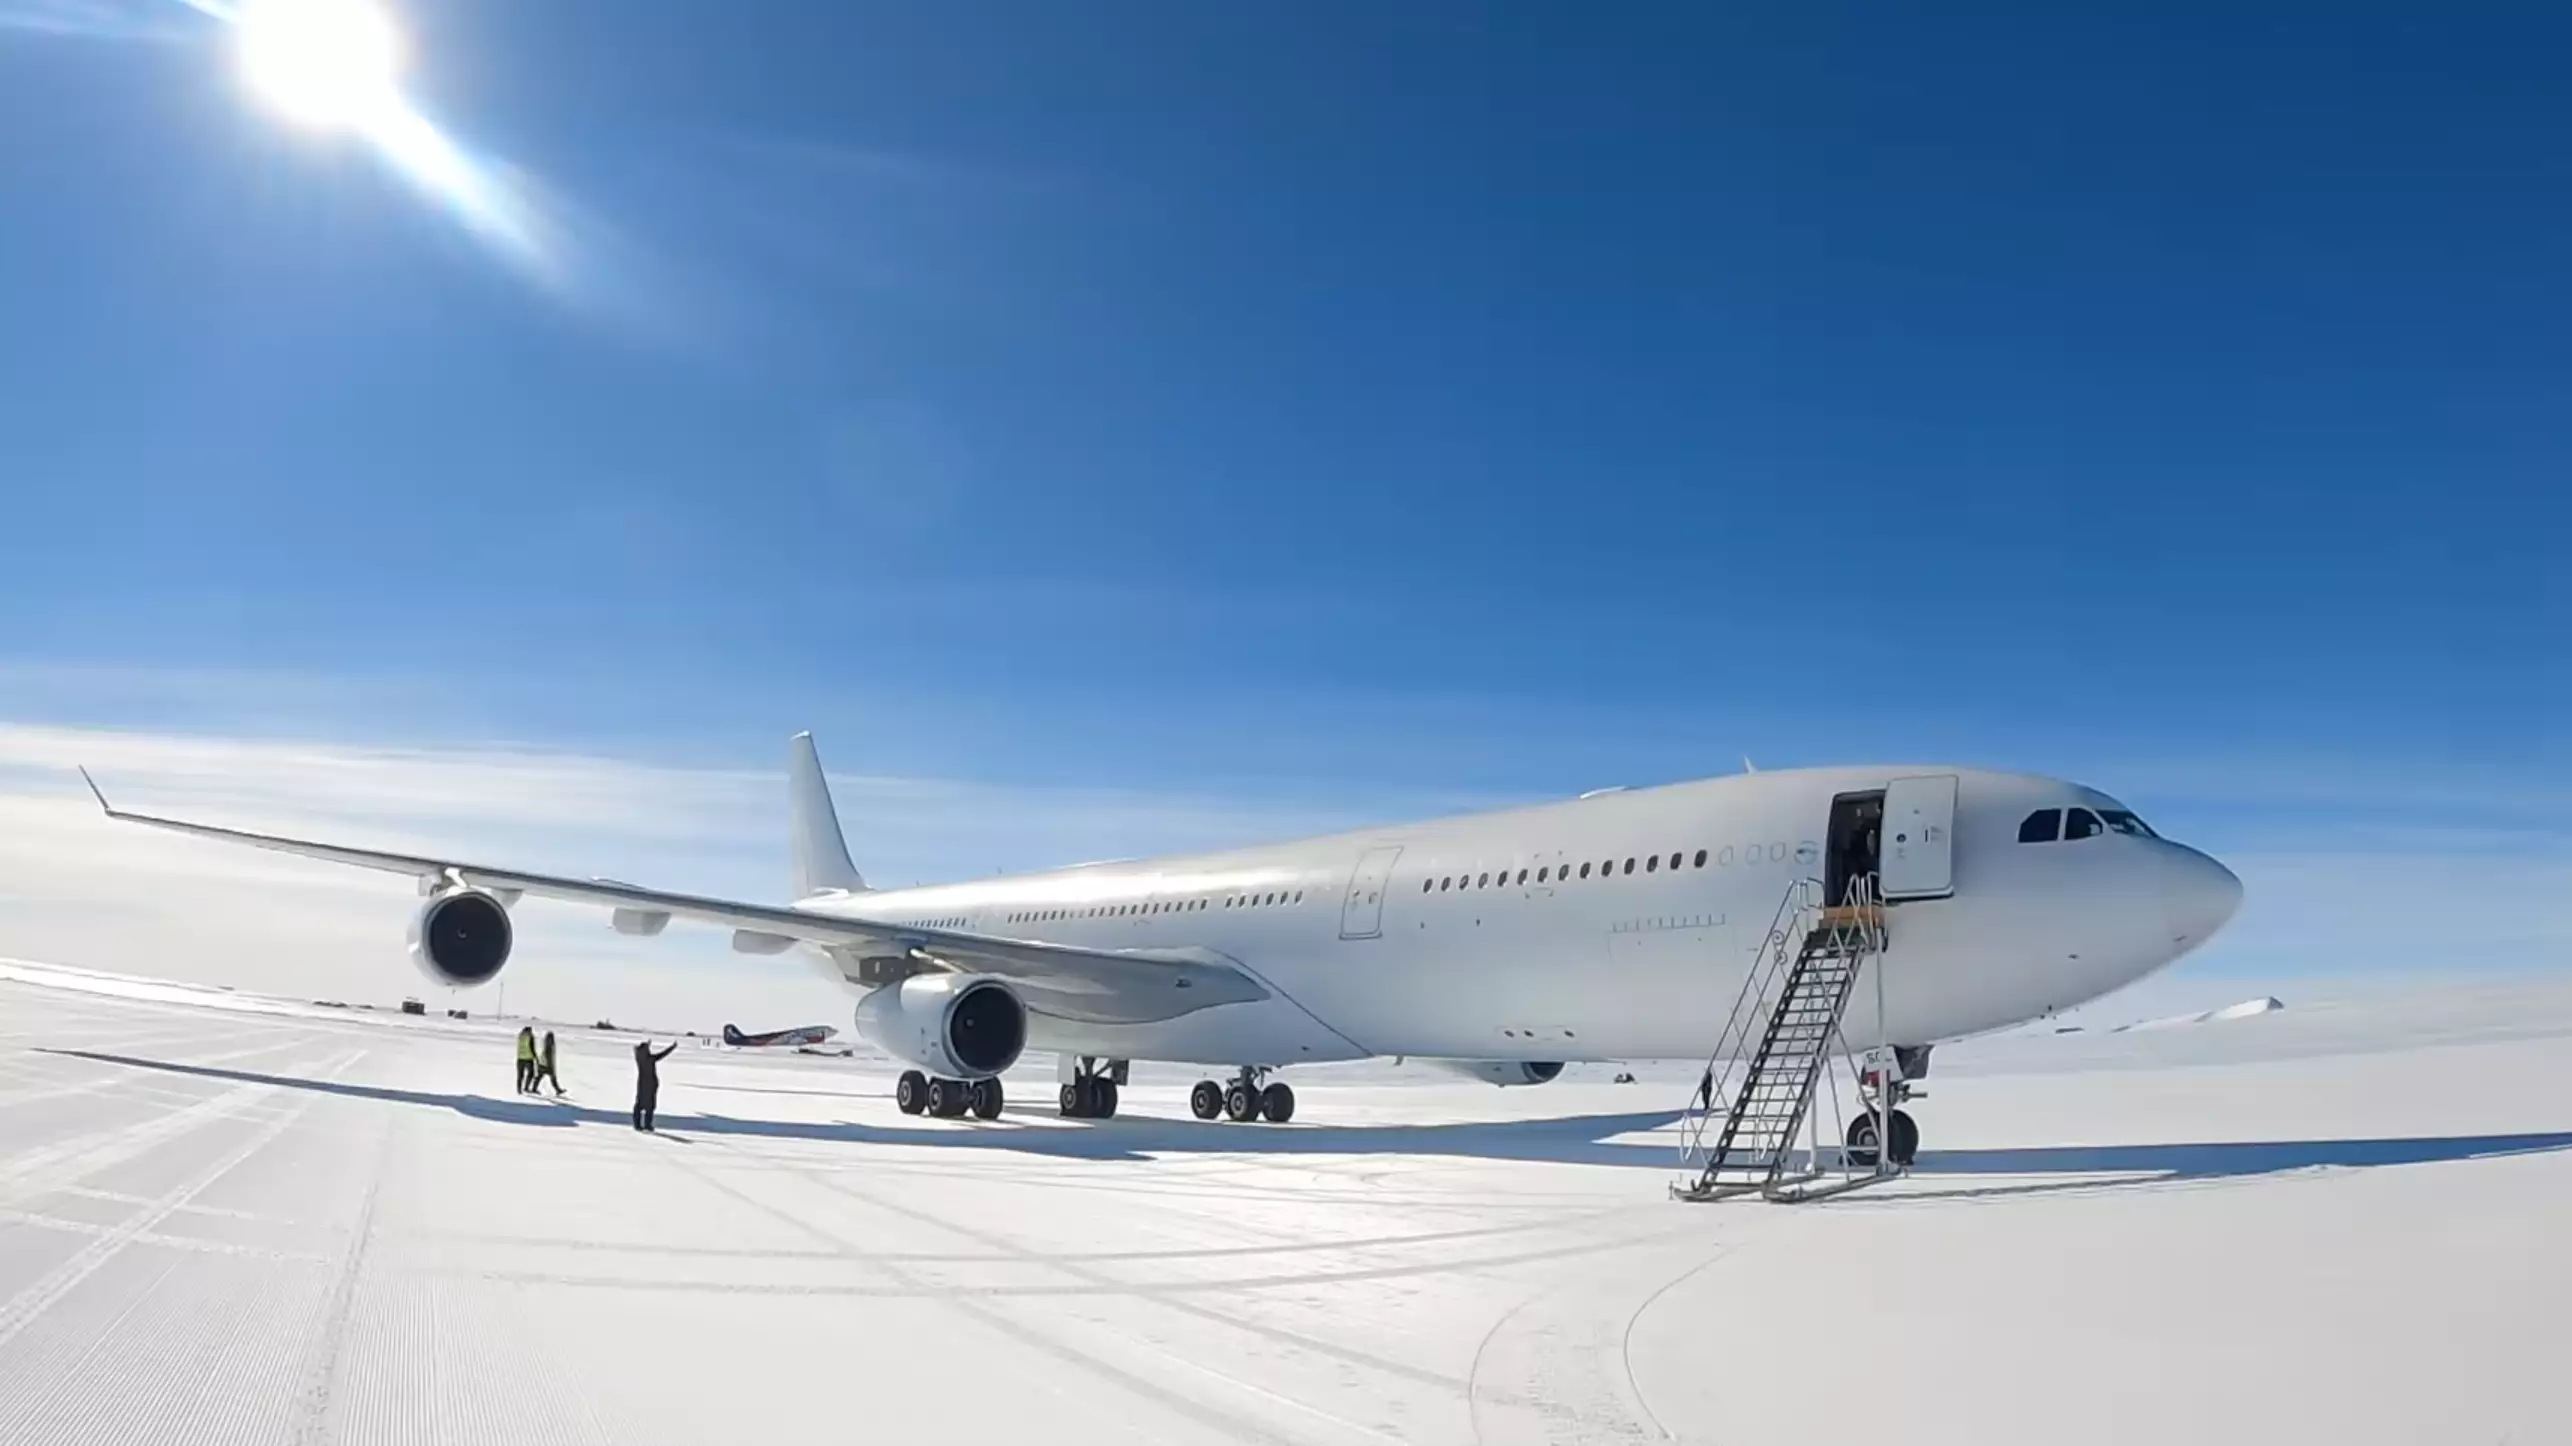 Record Breaking Pilot Lands First Airbus A340 in Antarctica  